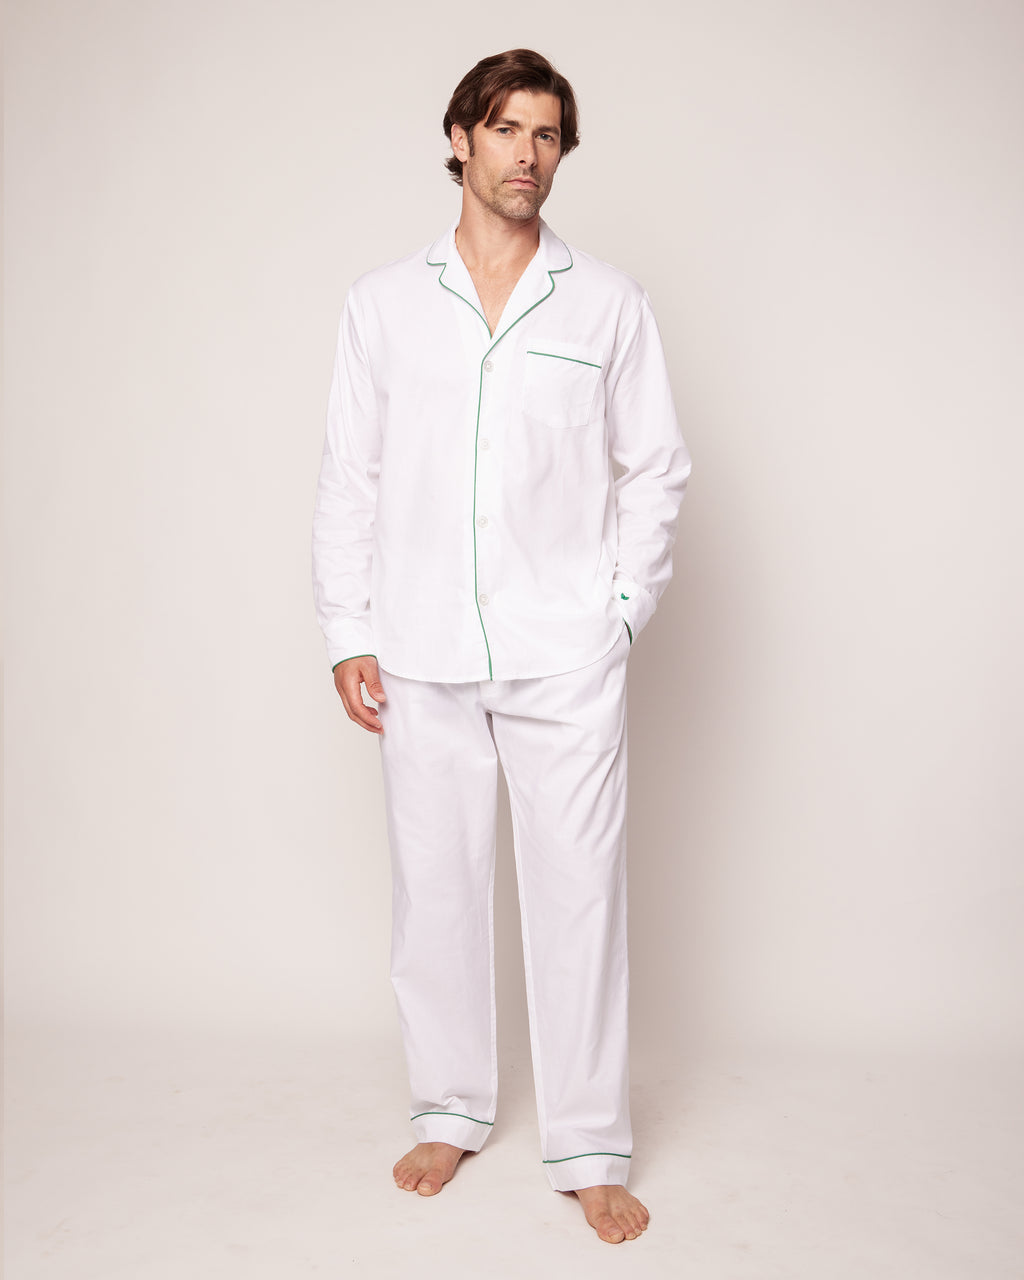 Men's Twill Pajama Set in White with Green Piping – Petite Plume